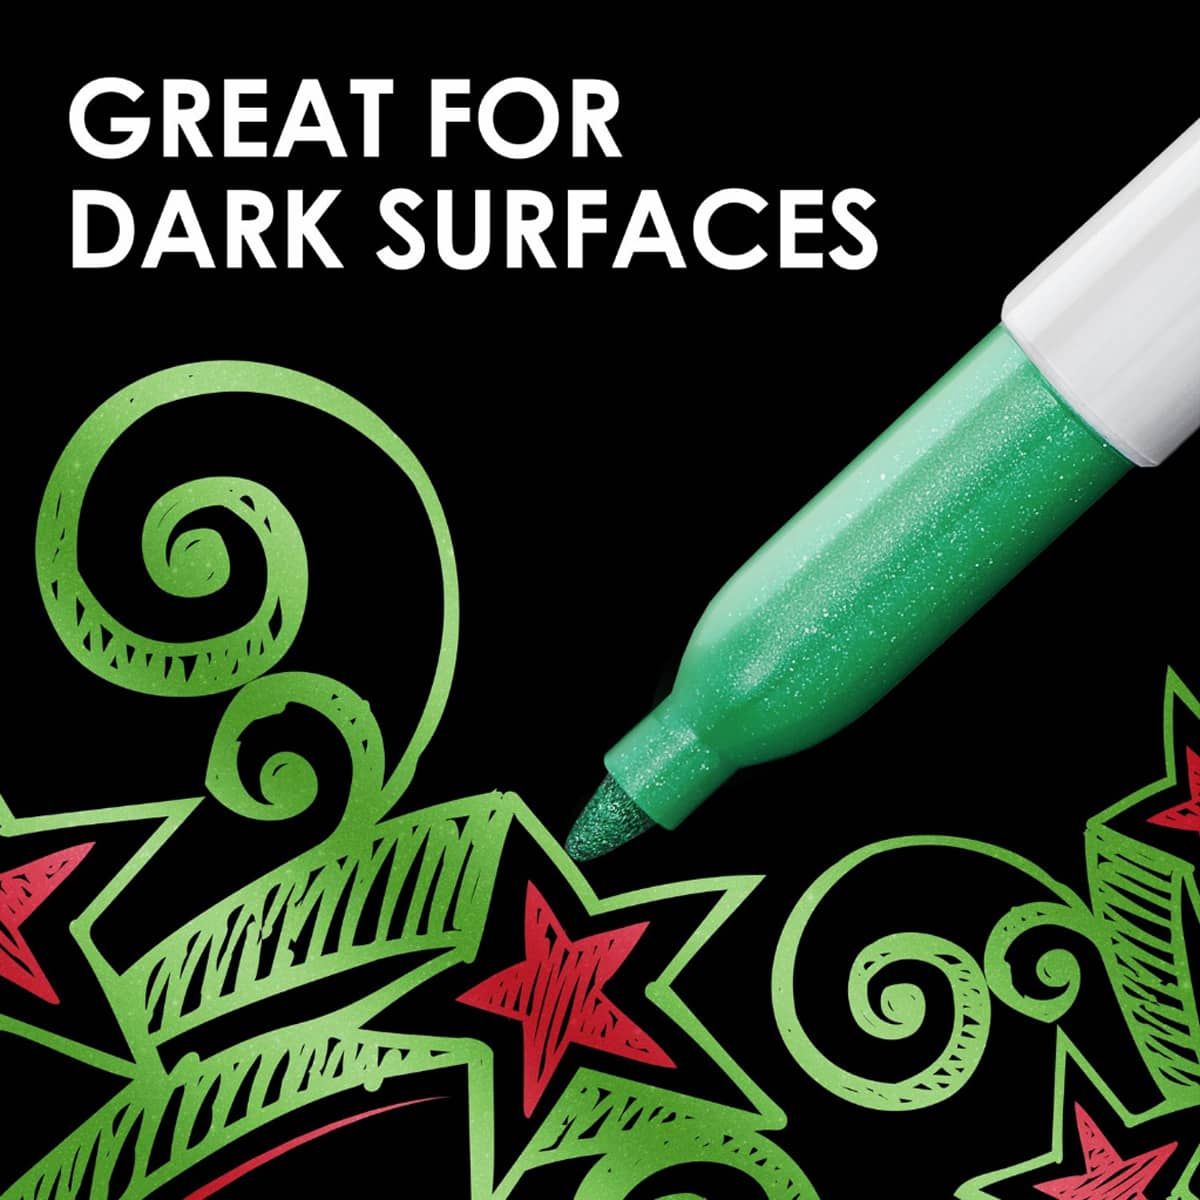 Great for dark surfaces